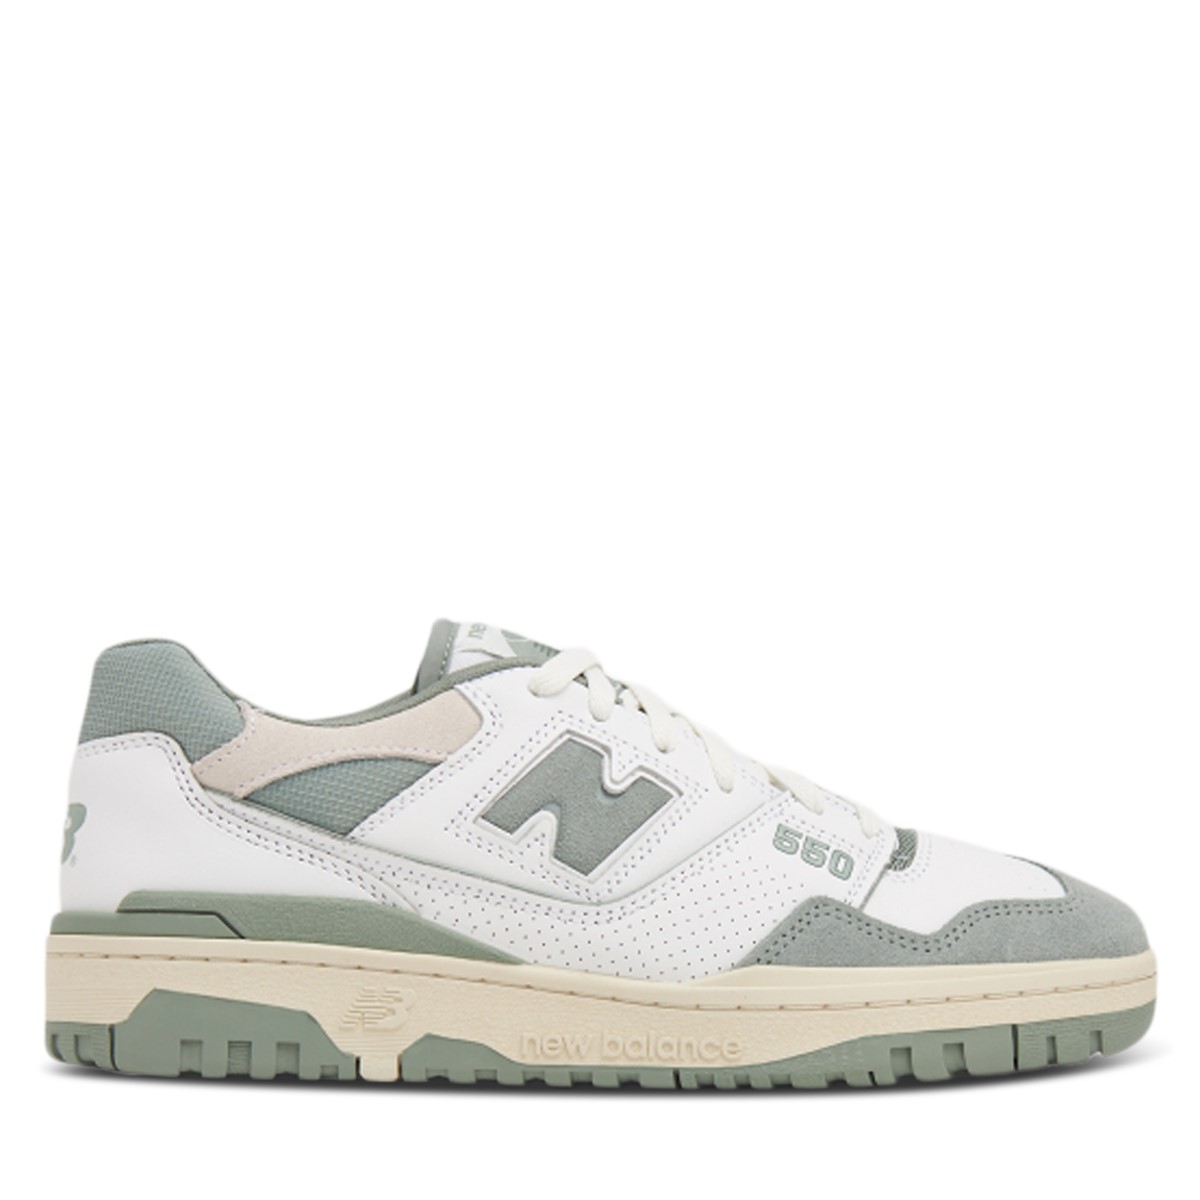 BB550 Sneakers in White/Sage/Beige